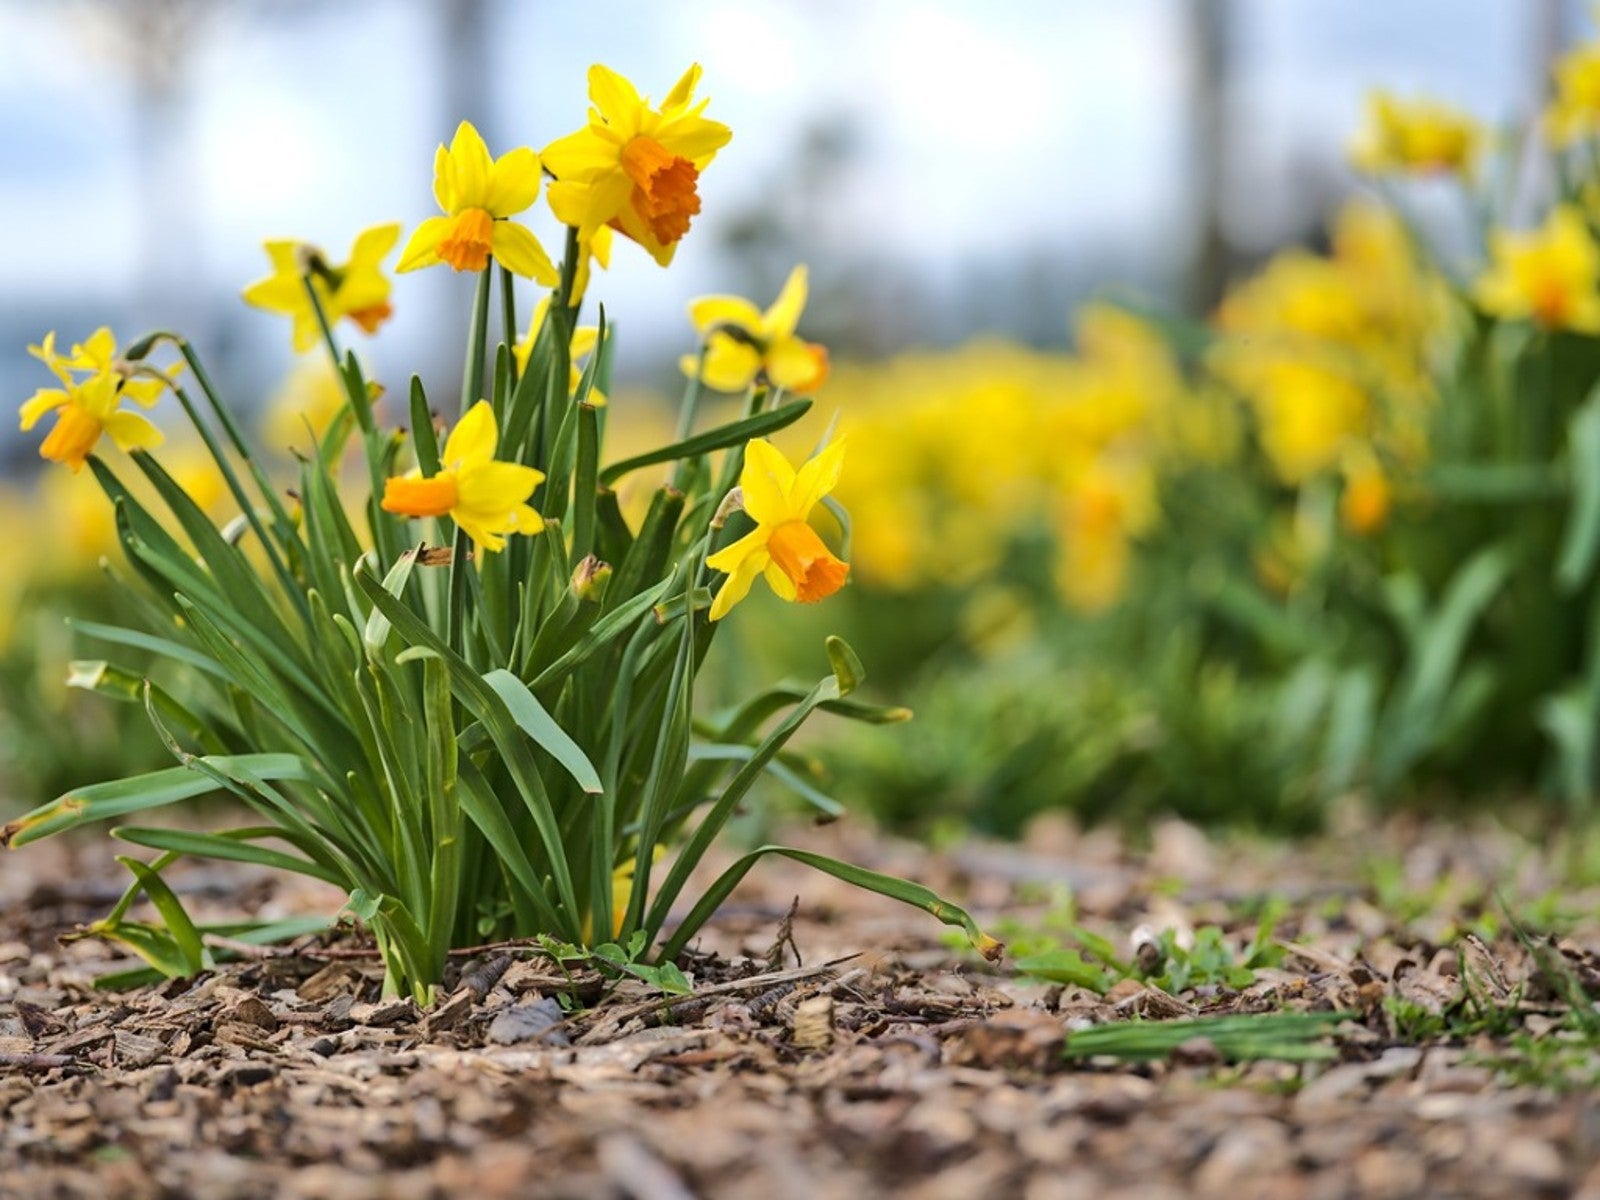 A cluster of yellow and orange daffodils growing out of the mulched ground with many more out of focus daffodils in the background